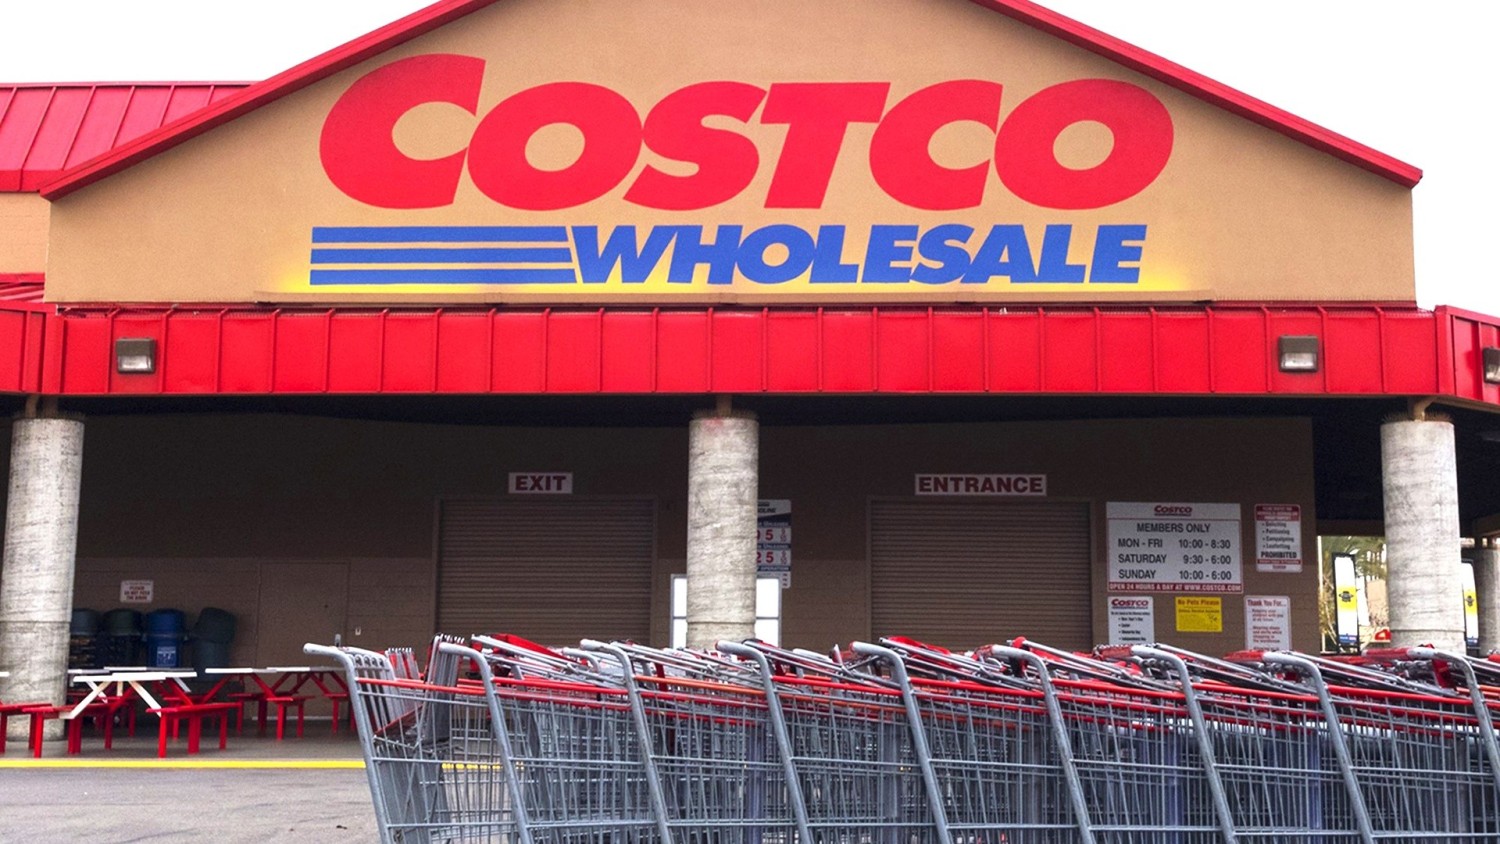 Costco couture: Billions on TikTok hot for fashion trends at store